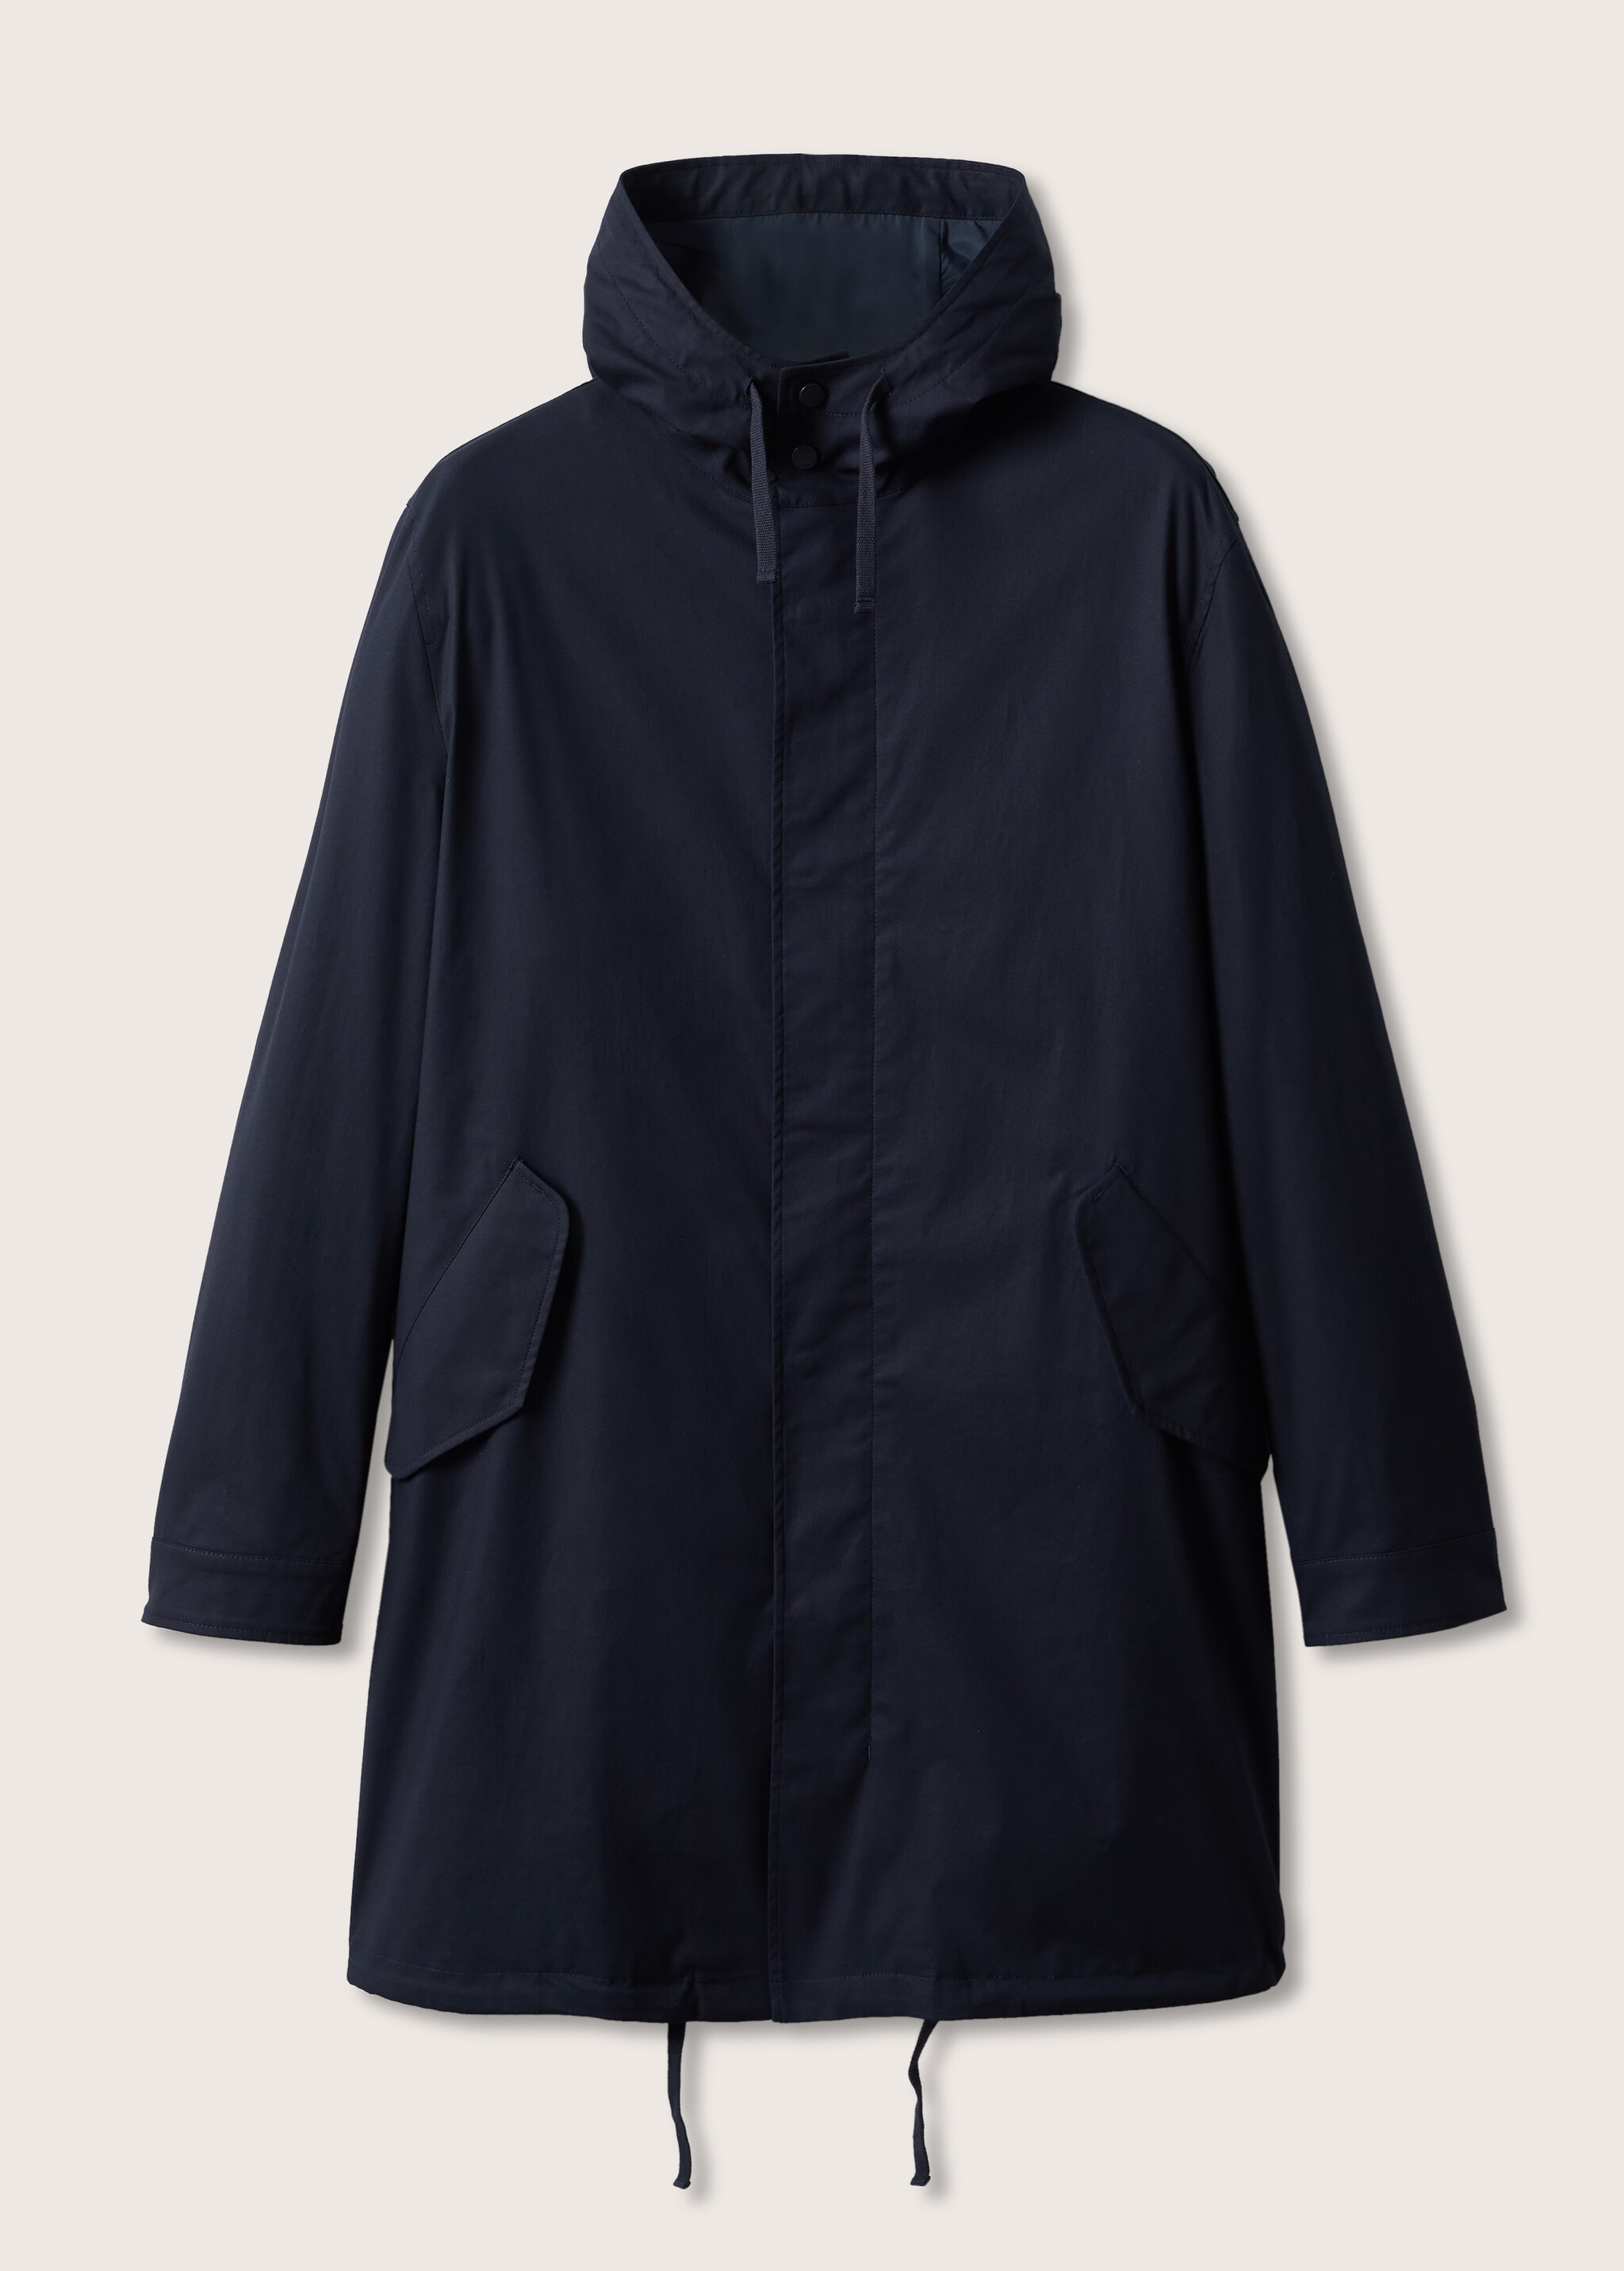 Waterproof cotton parka - Article without model